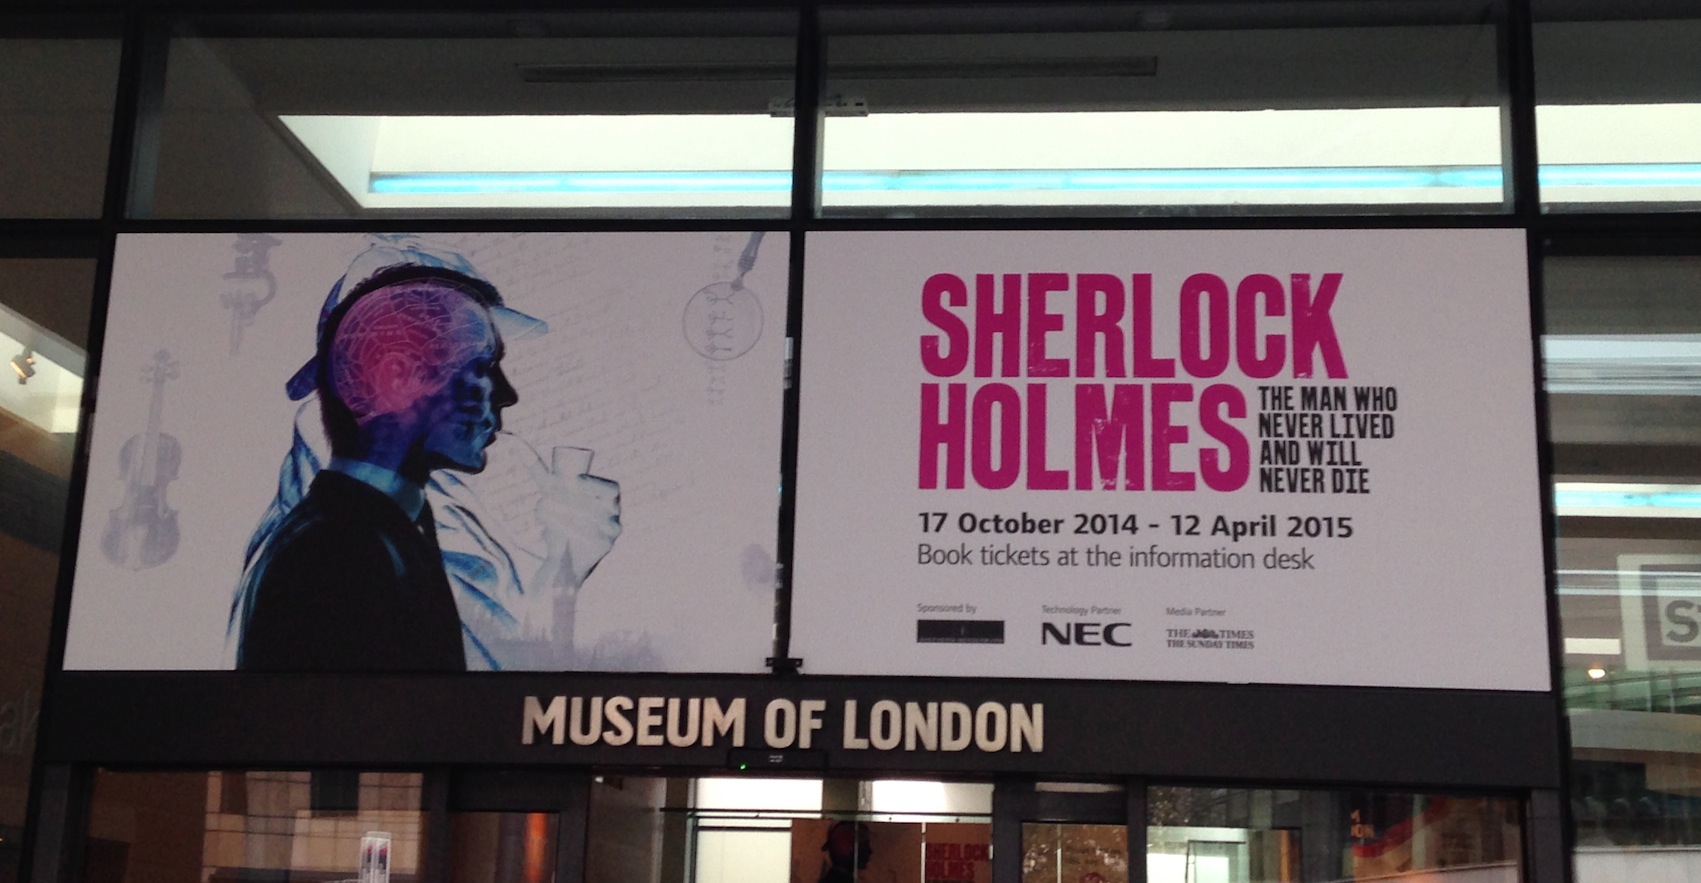 Sherlock Holmes Exhibition at the Museum of London